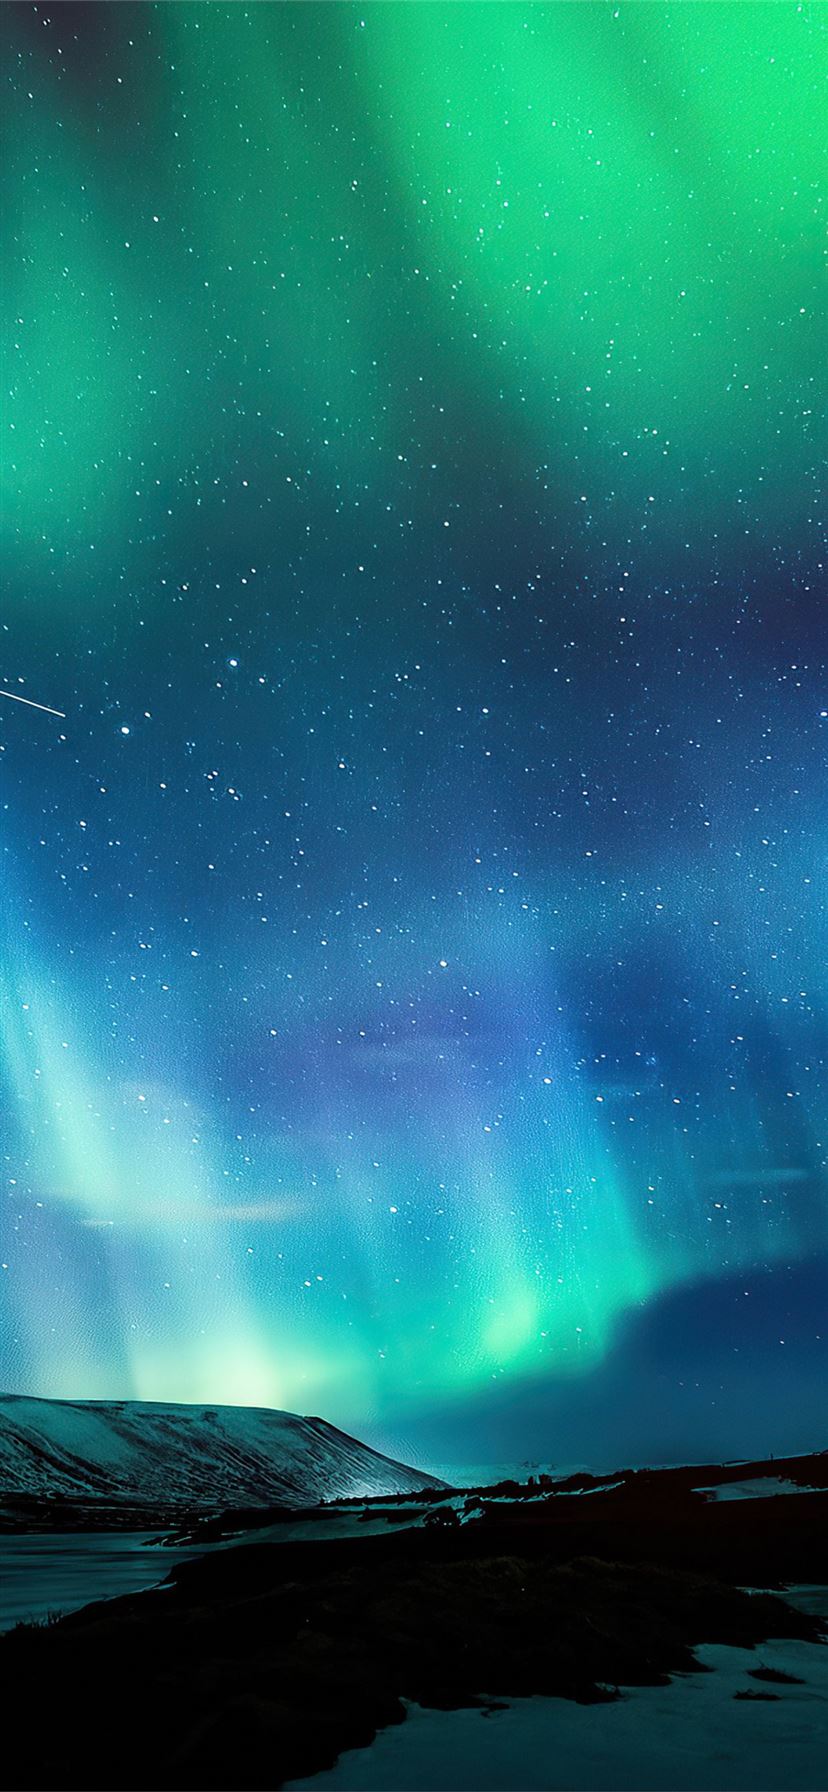 Wallpaper ID 890249  night sky lights bright sky iphone backgrounds  environment astronomy aurora nature iphone wallpapers space alaska  wallpaper no people idyllic free download